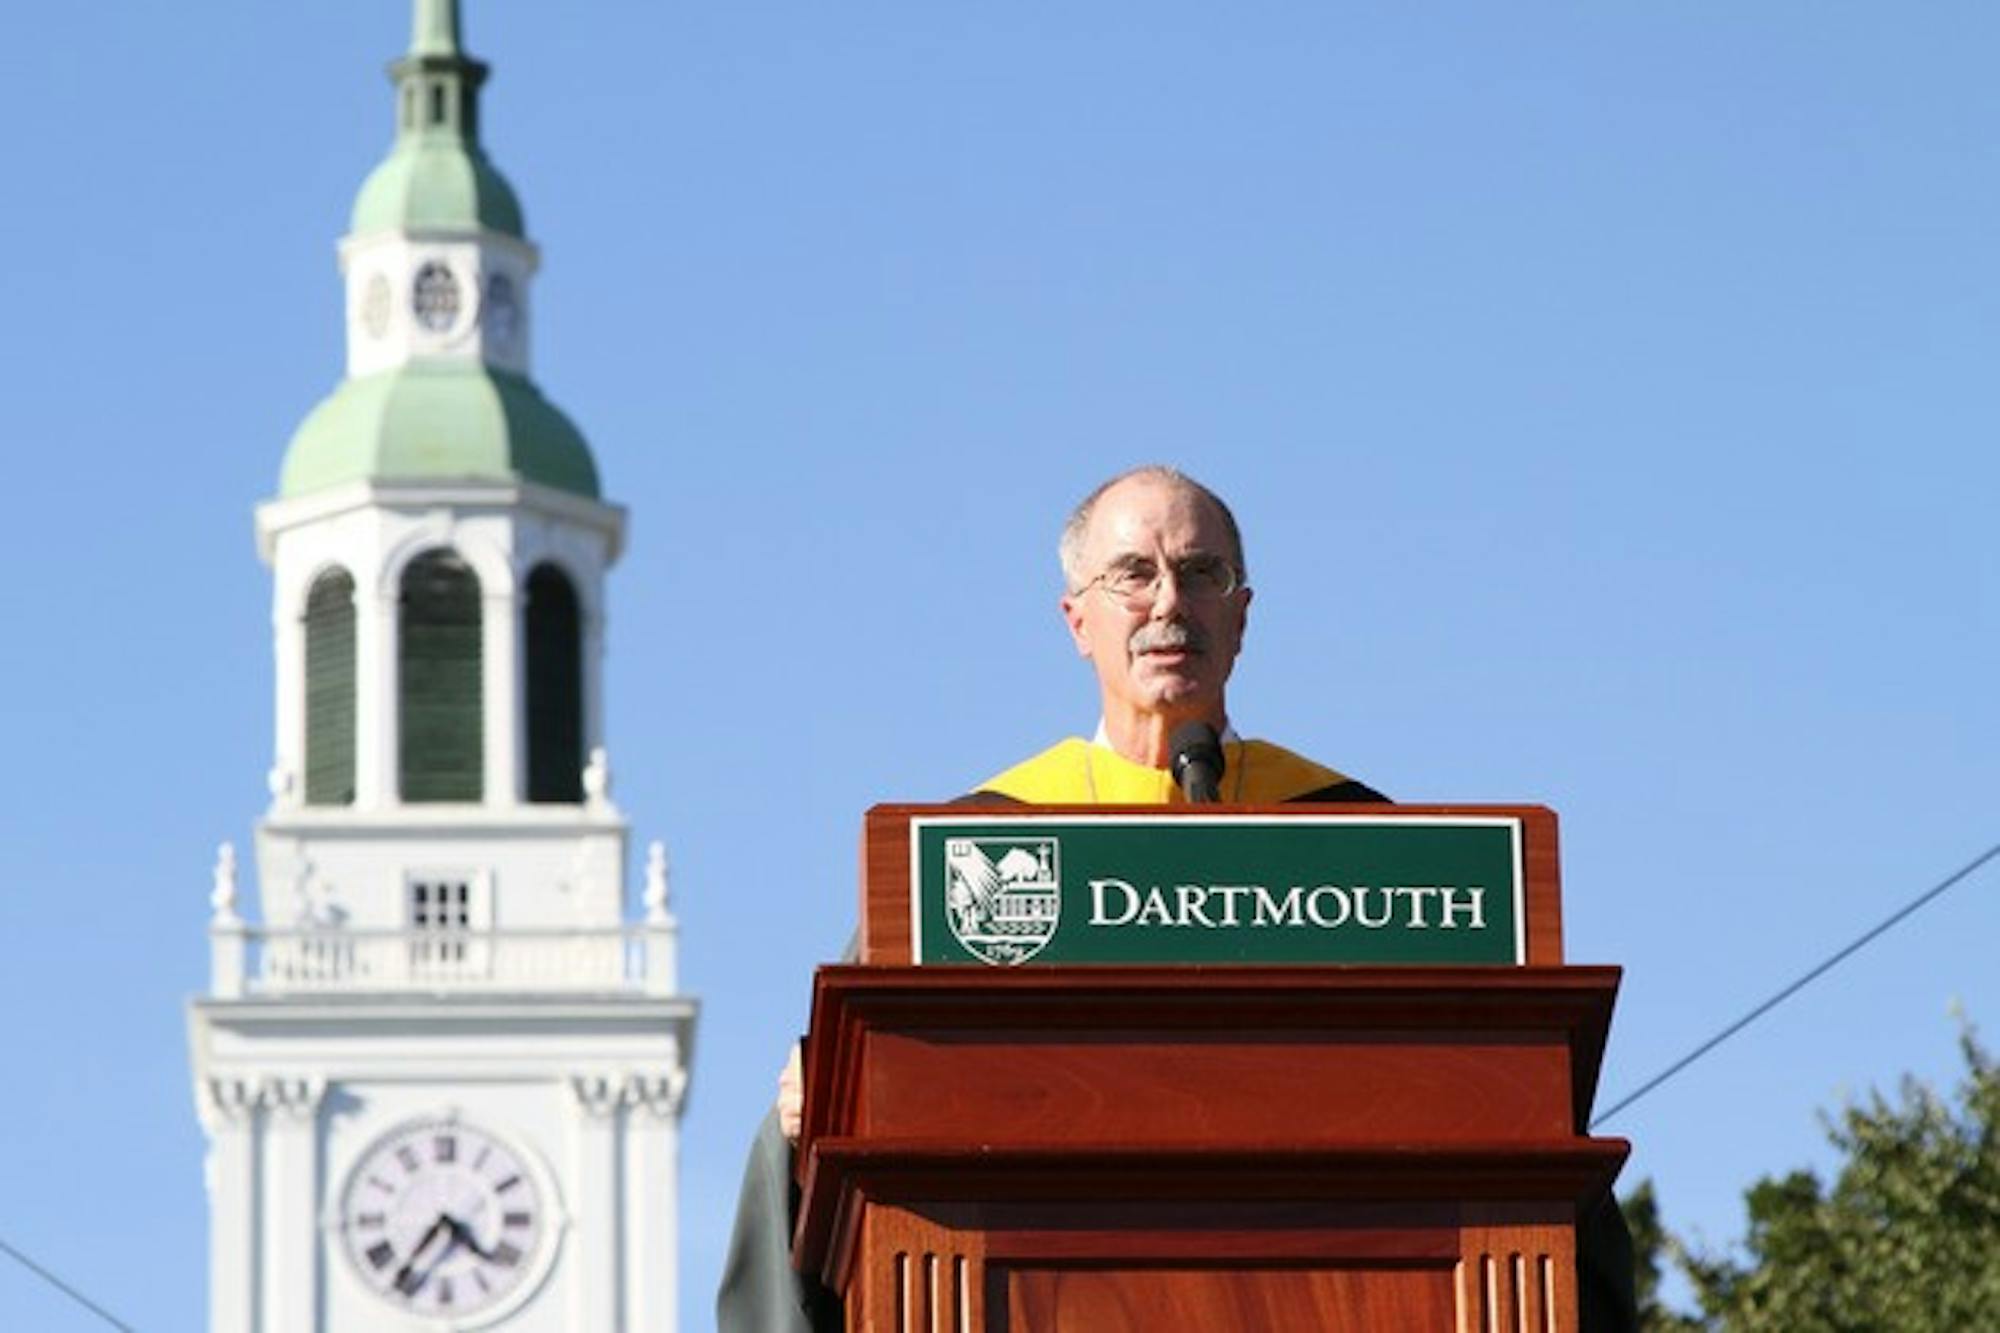 College President Phil Hanlon spoke to 2,500 people about his vision for the College.